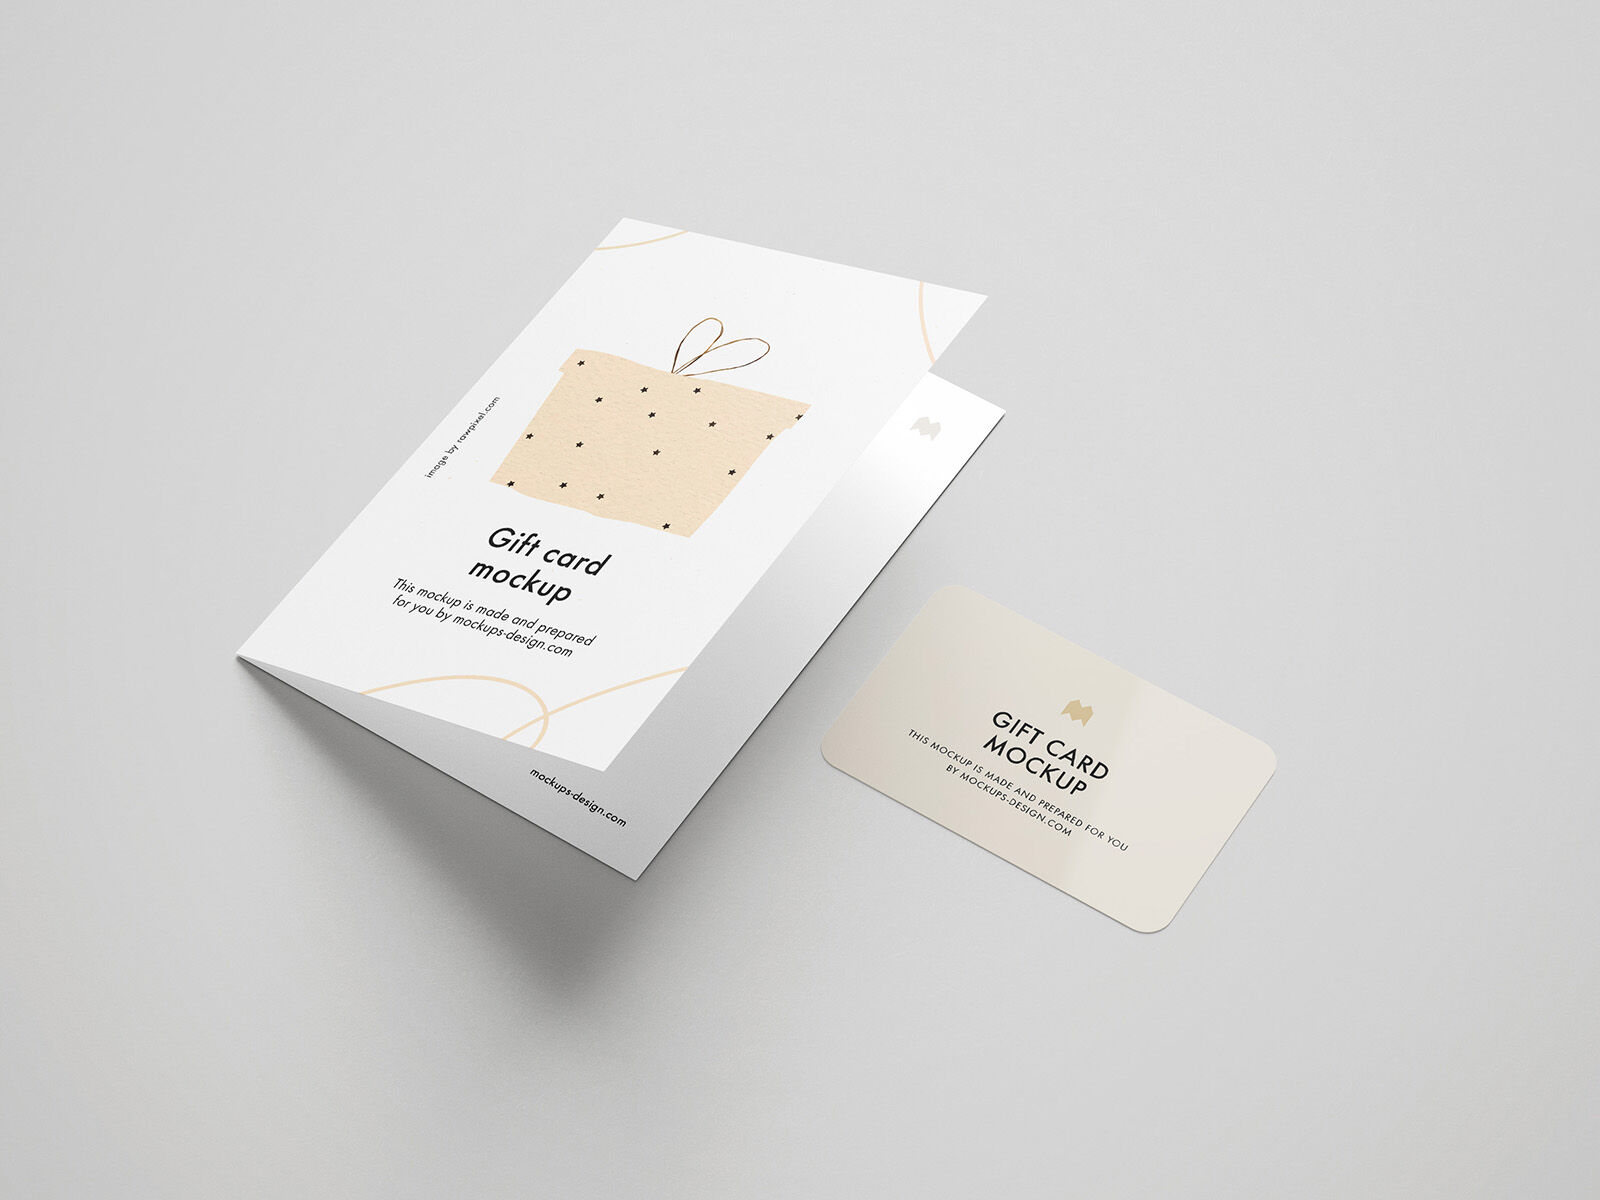 5 Gift Card and Gift card Holder Mockups in Different Views FREE PSD